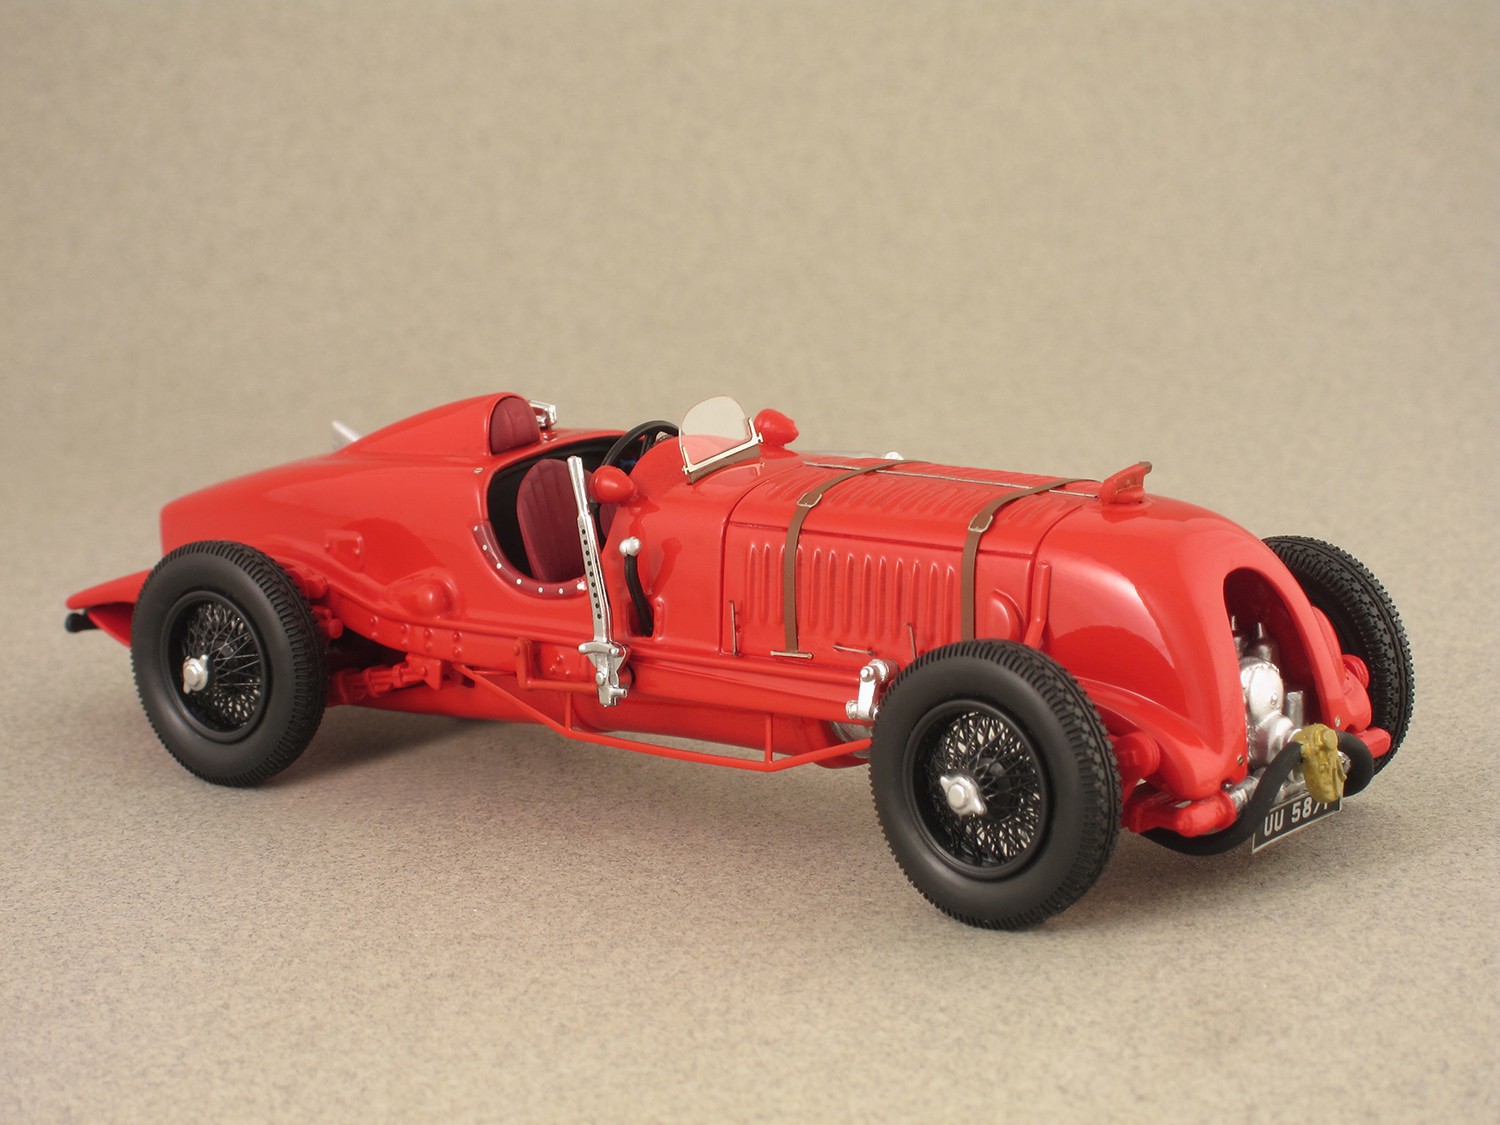 Bentley 4 1/2 Litre Supercharged Blower (NEO) 1:43